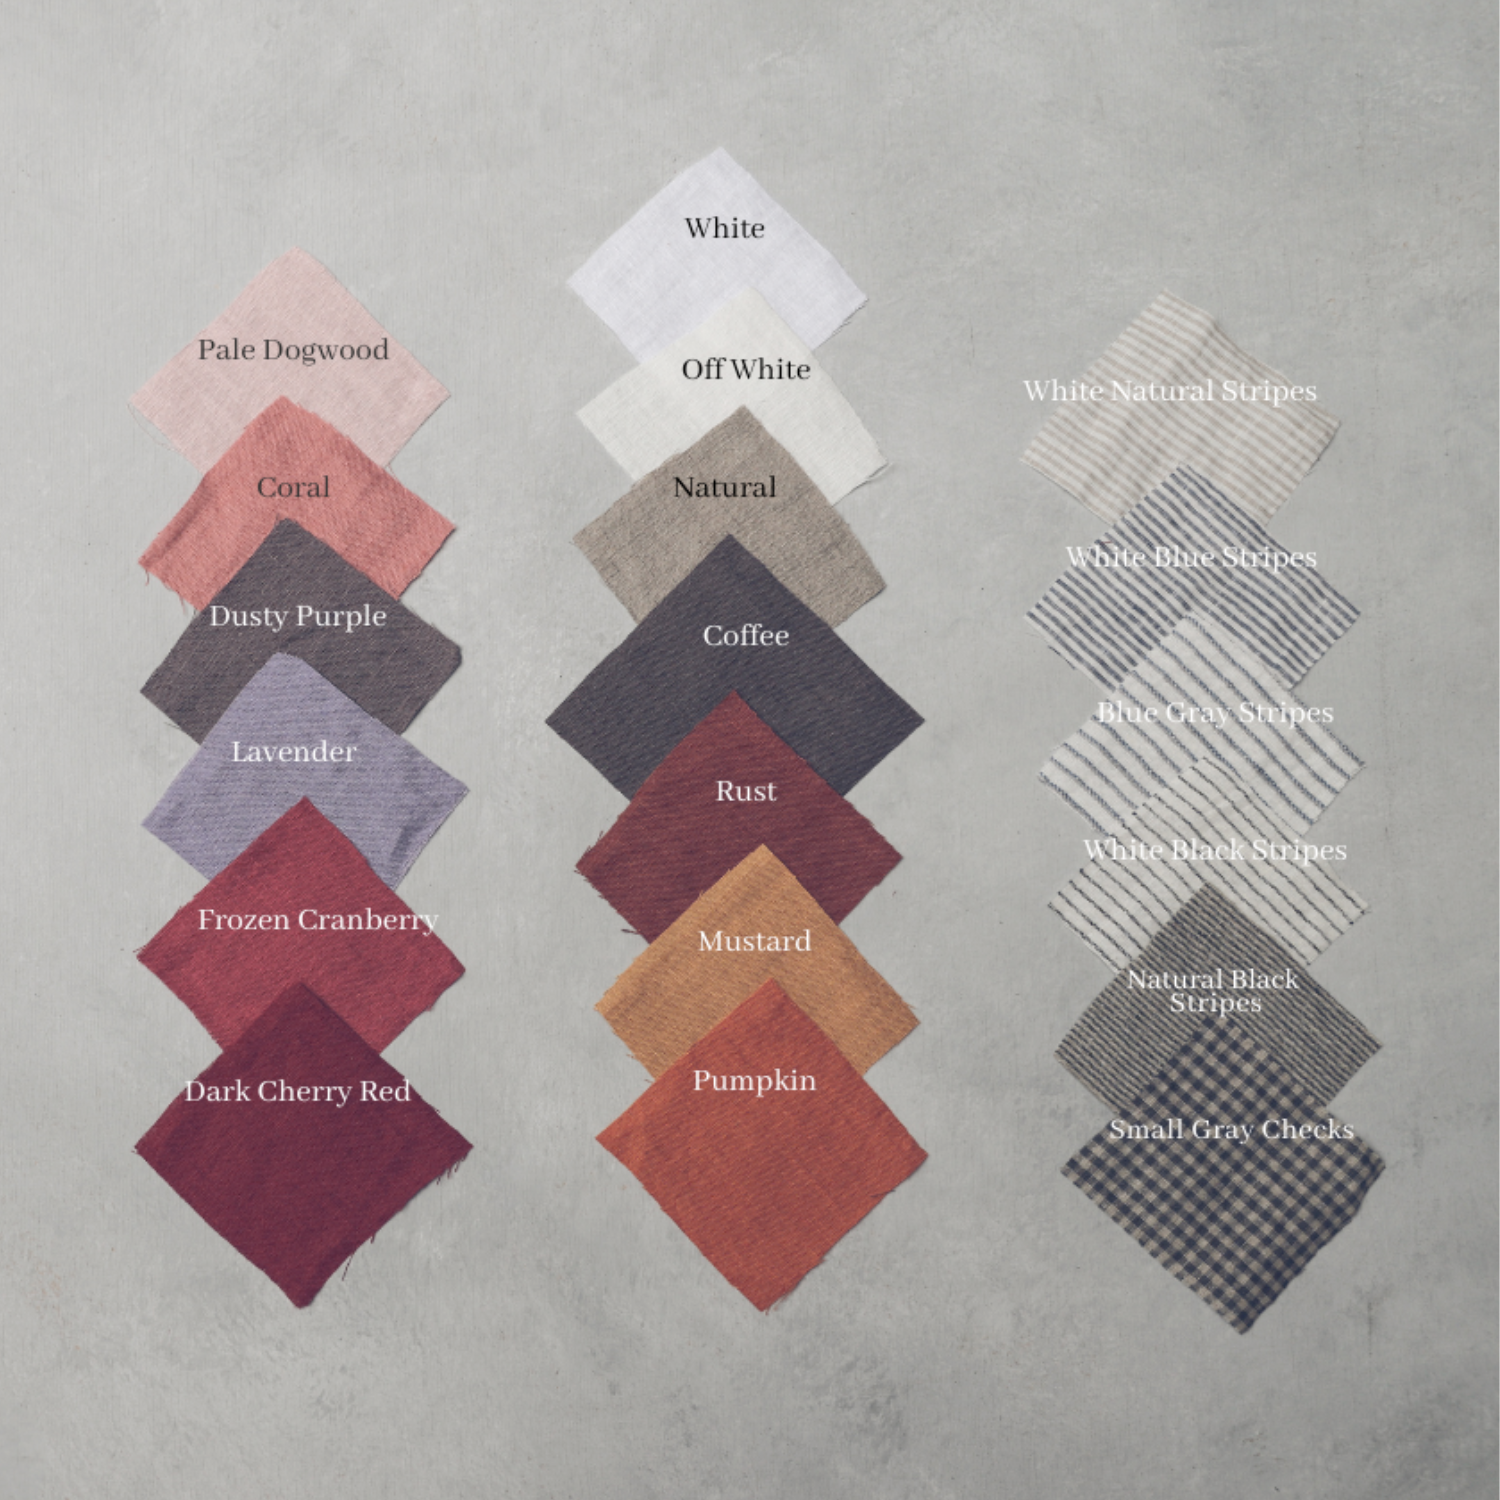 A selection of linen fabric swatches in different colors.